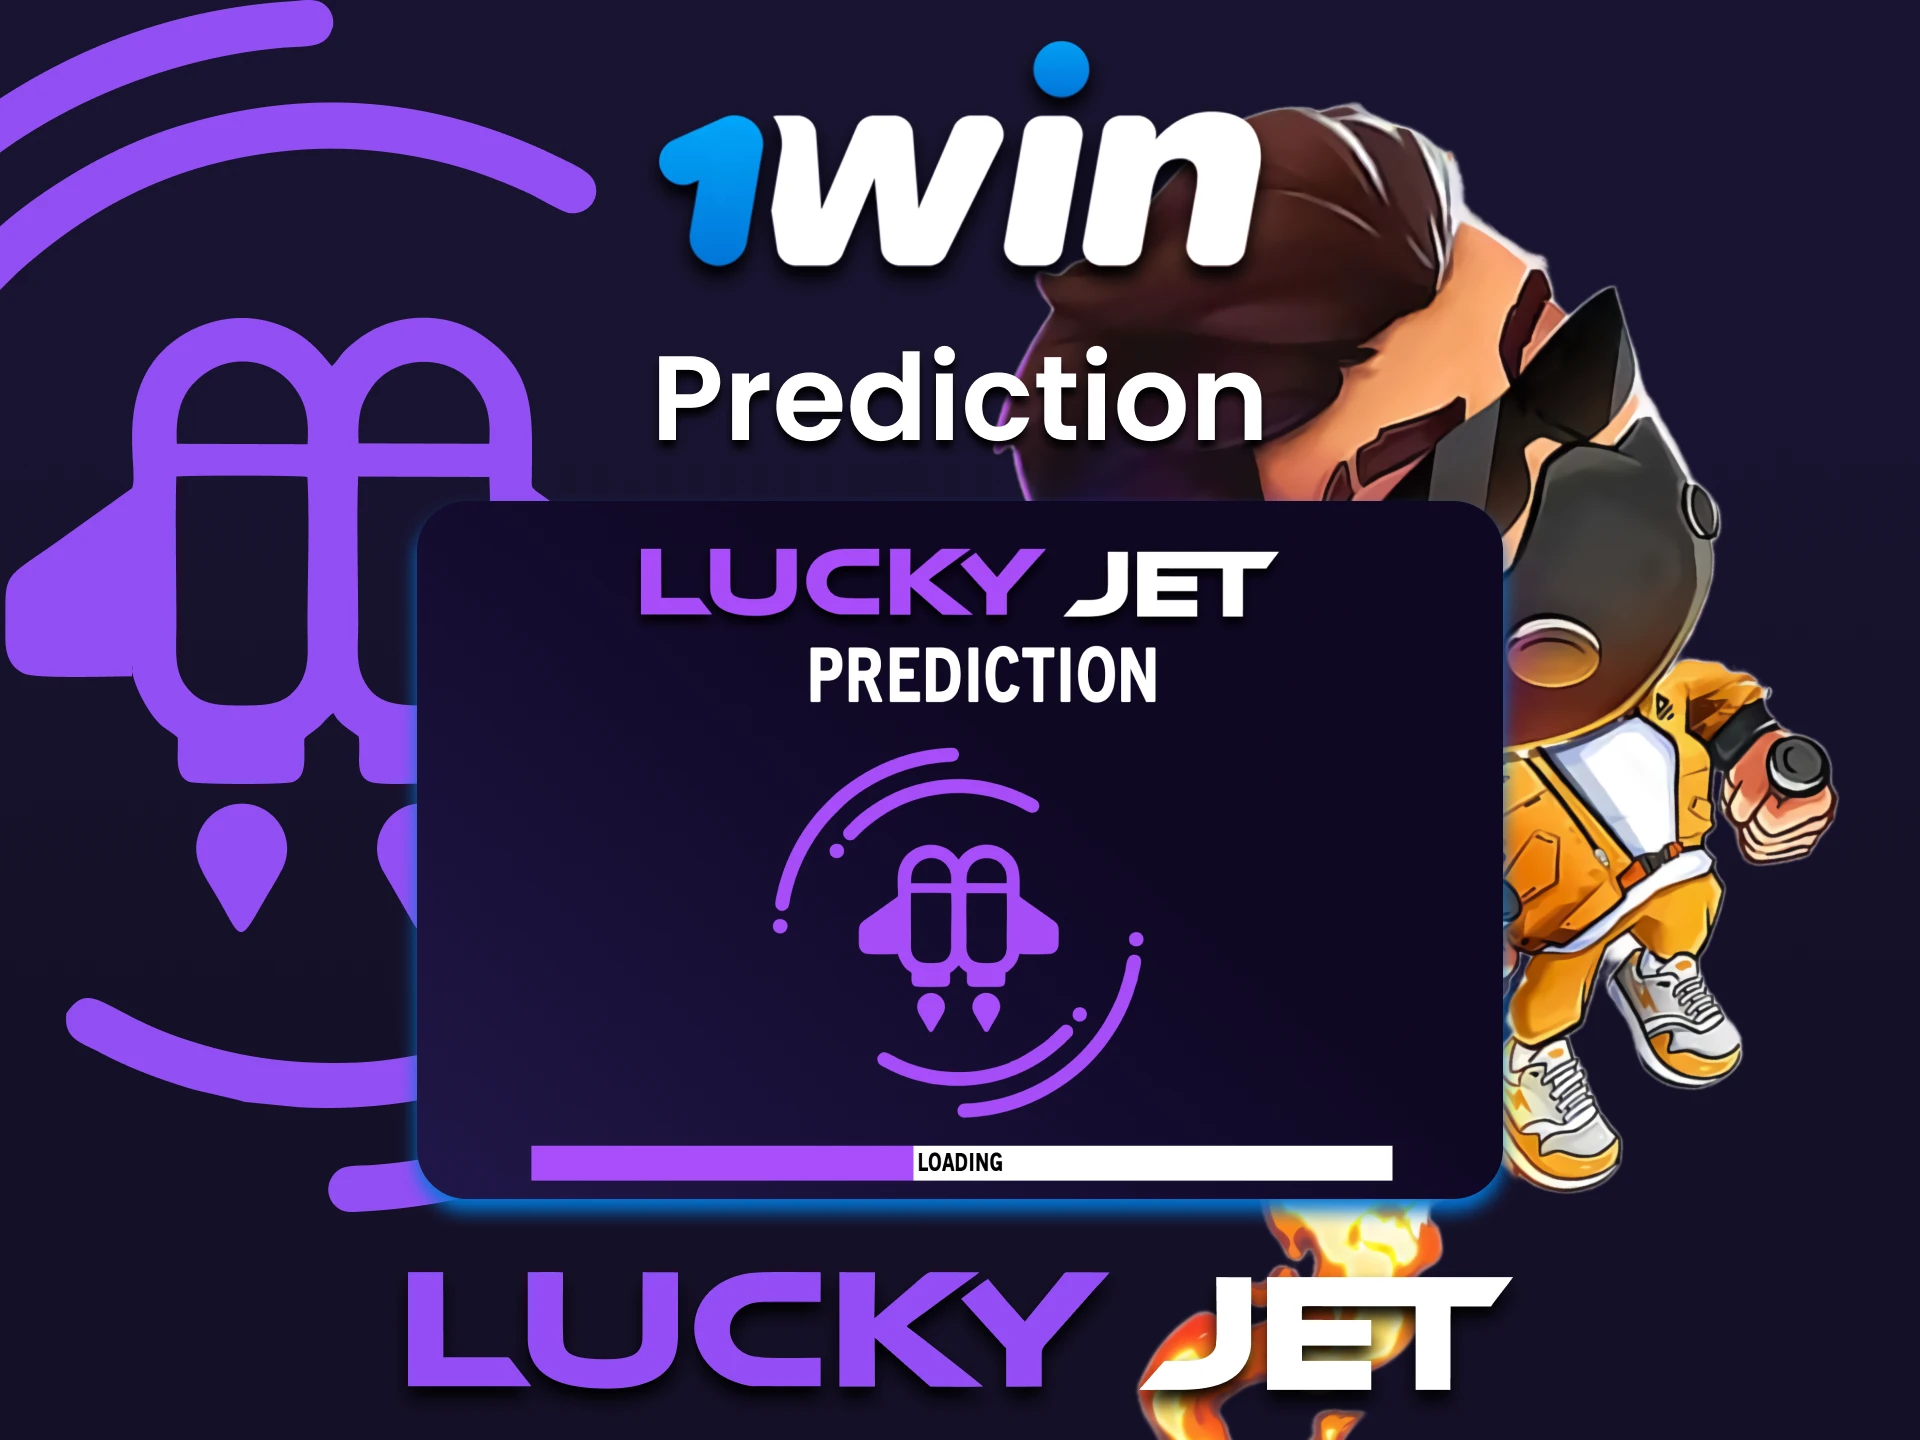 There are special third party software for playing Lucky Jet on 1win.